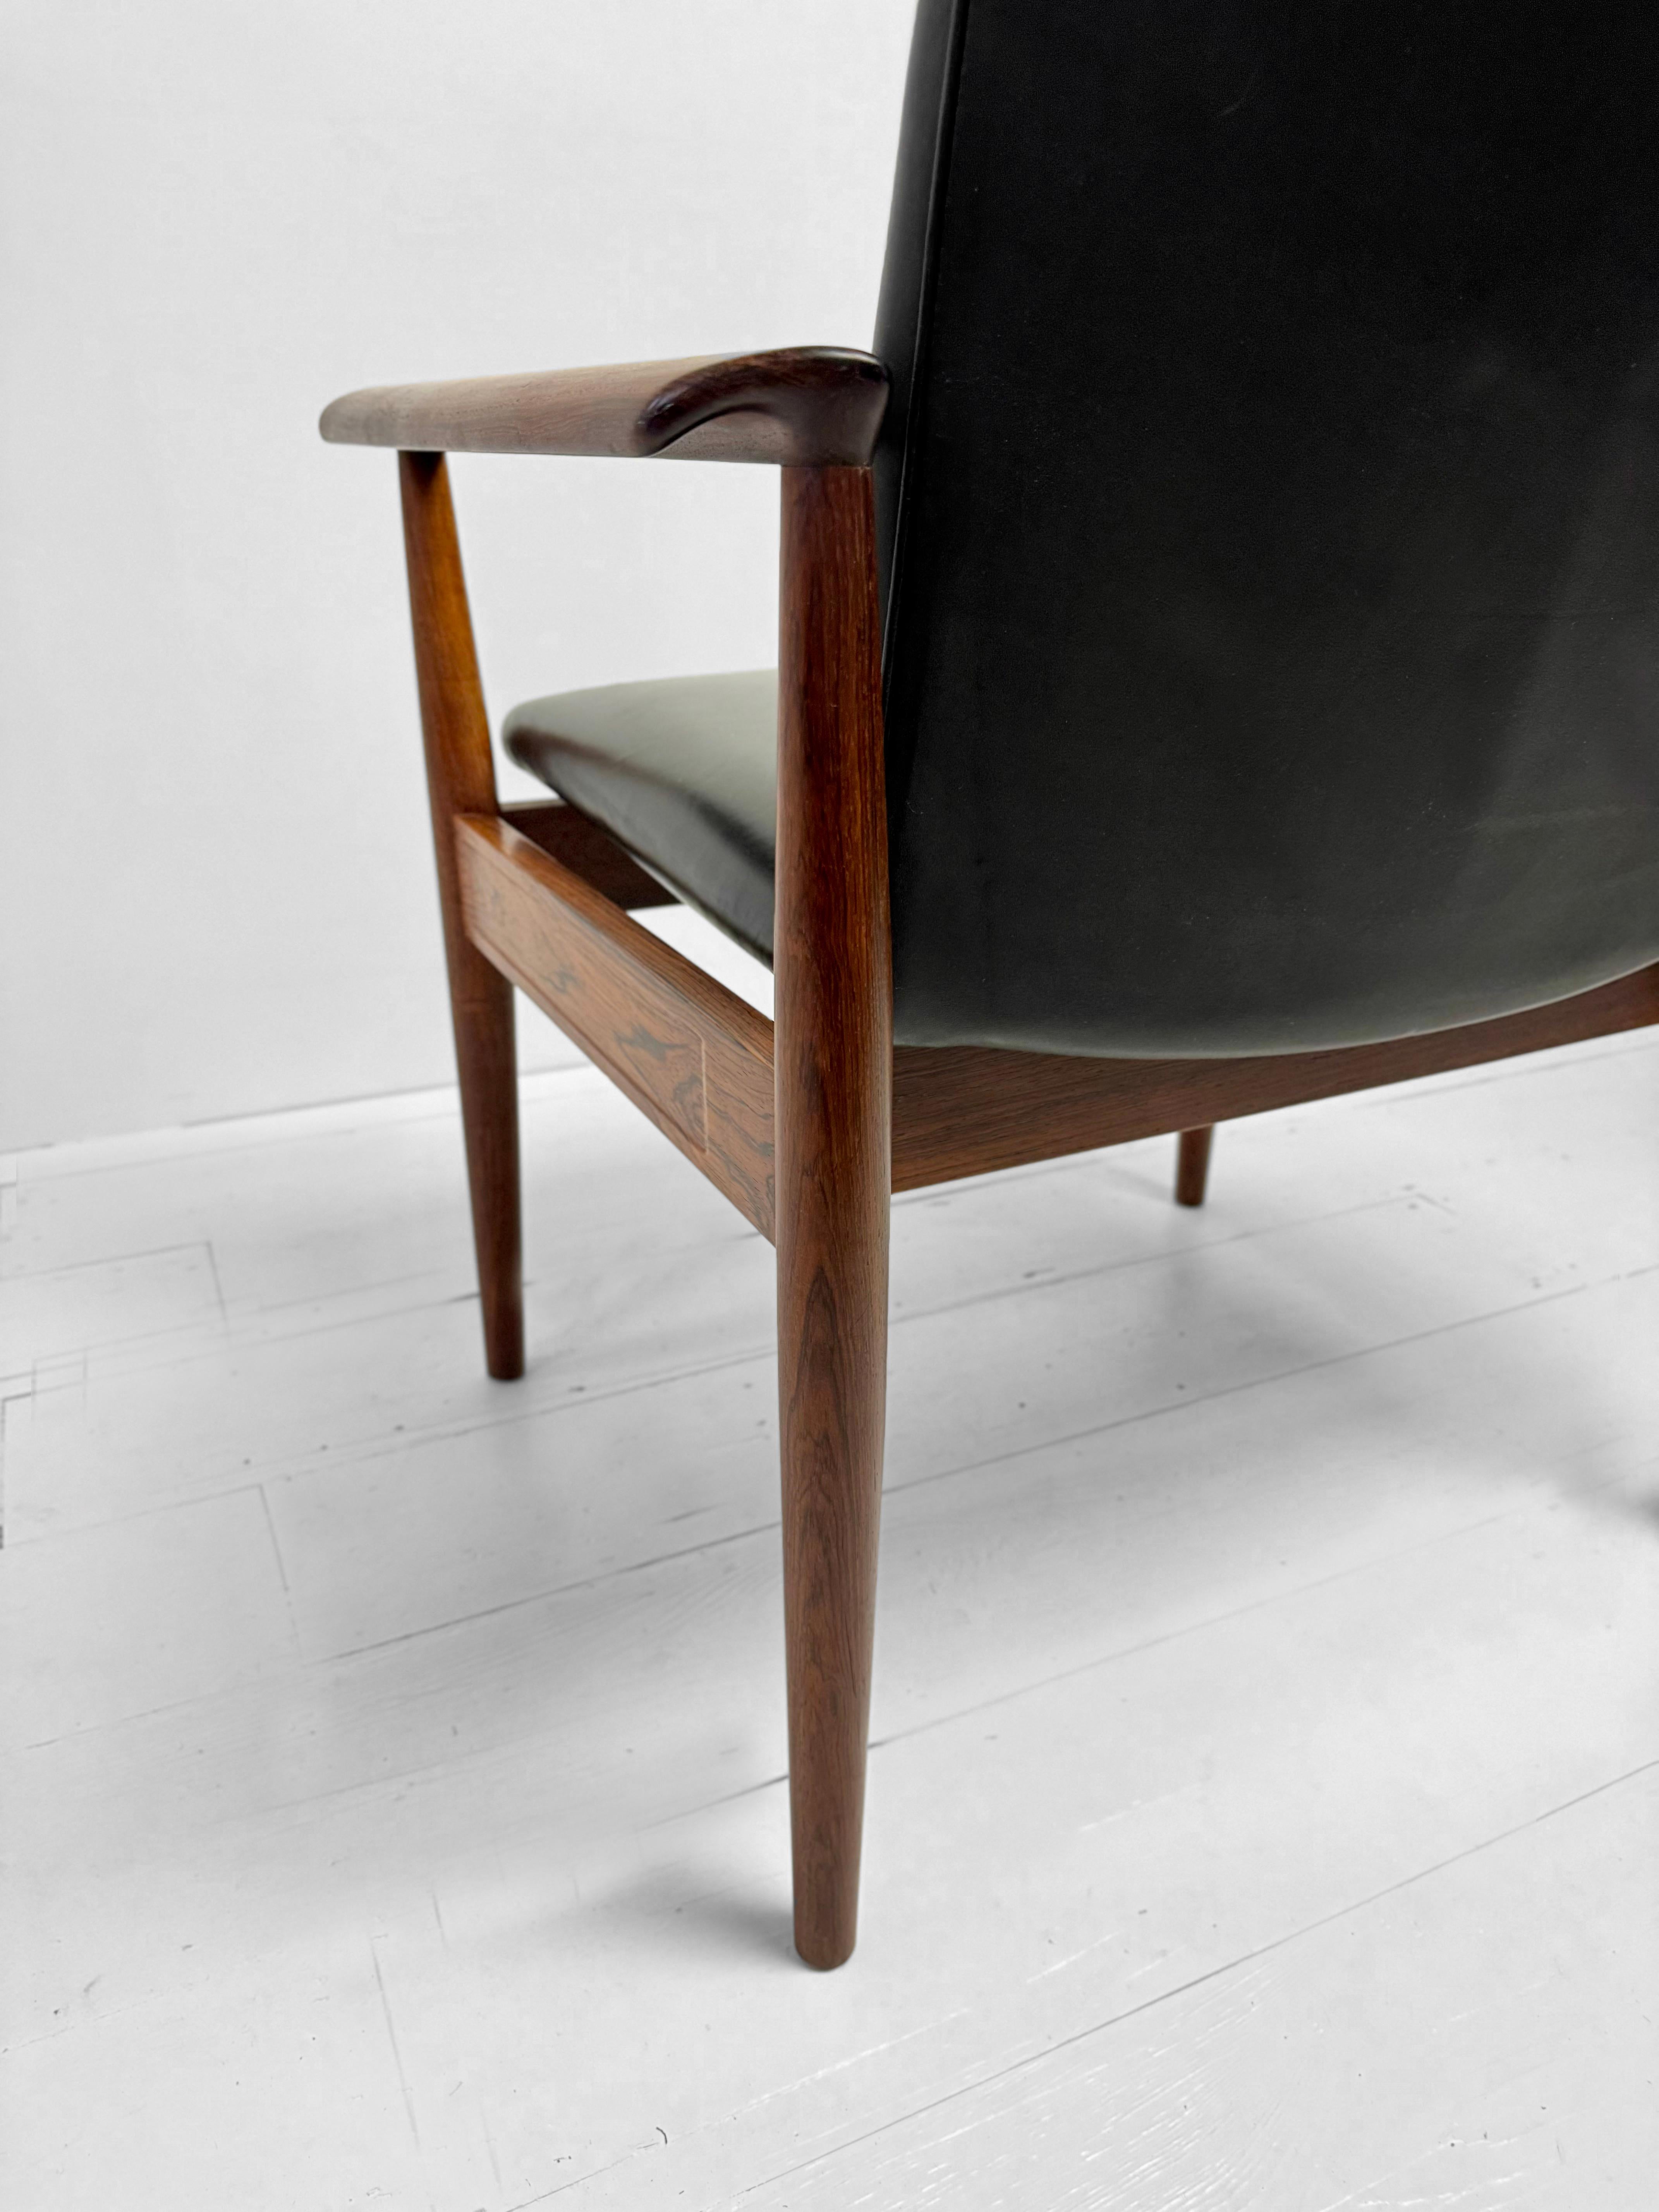 Set of Diplomat Armchairs in Rosewood and Leather by Finn Juhl, Denmark c.1960's For Sale 6